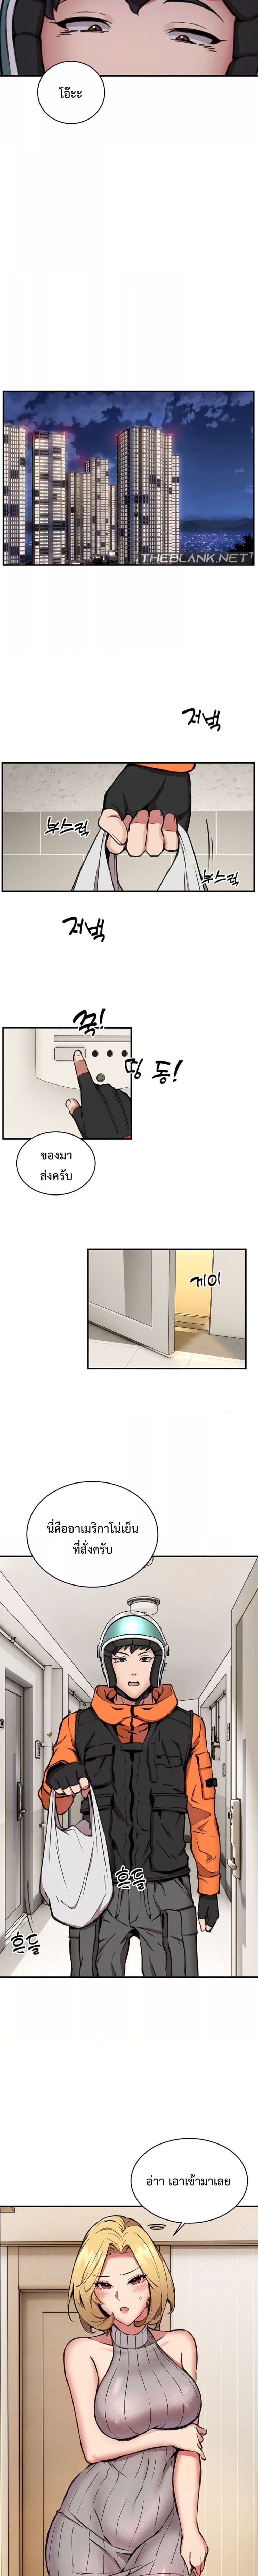 Driver in the New City ตอนที่ 8 ภาพ 10